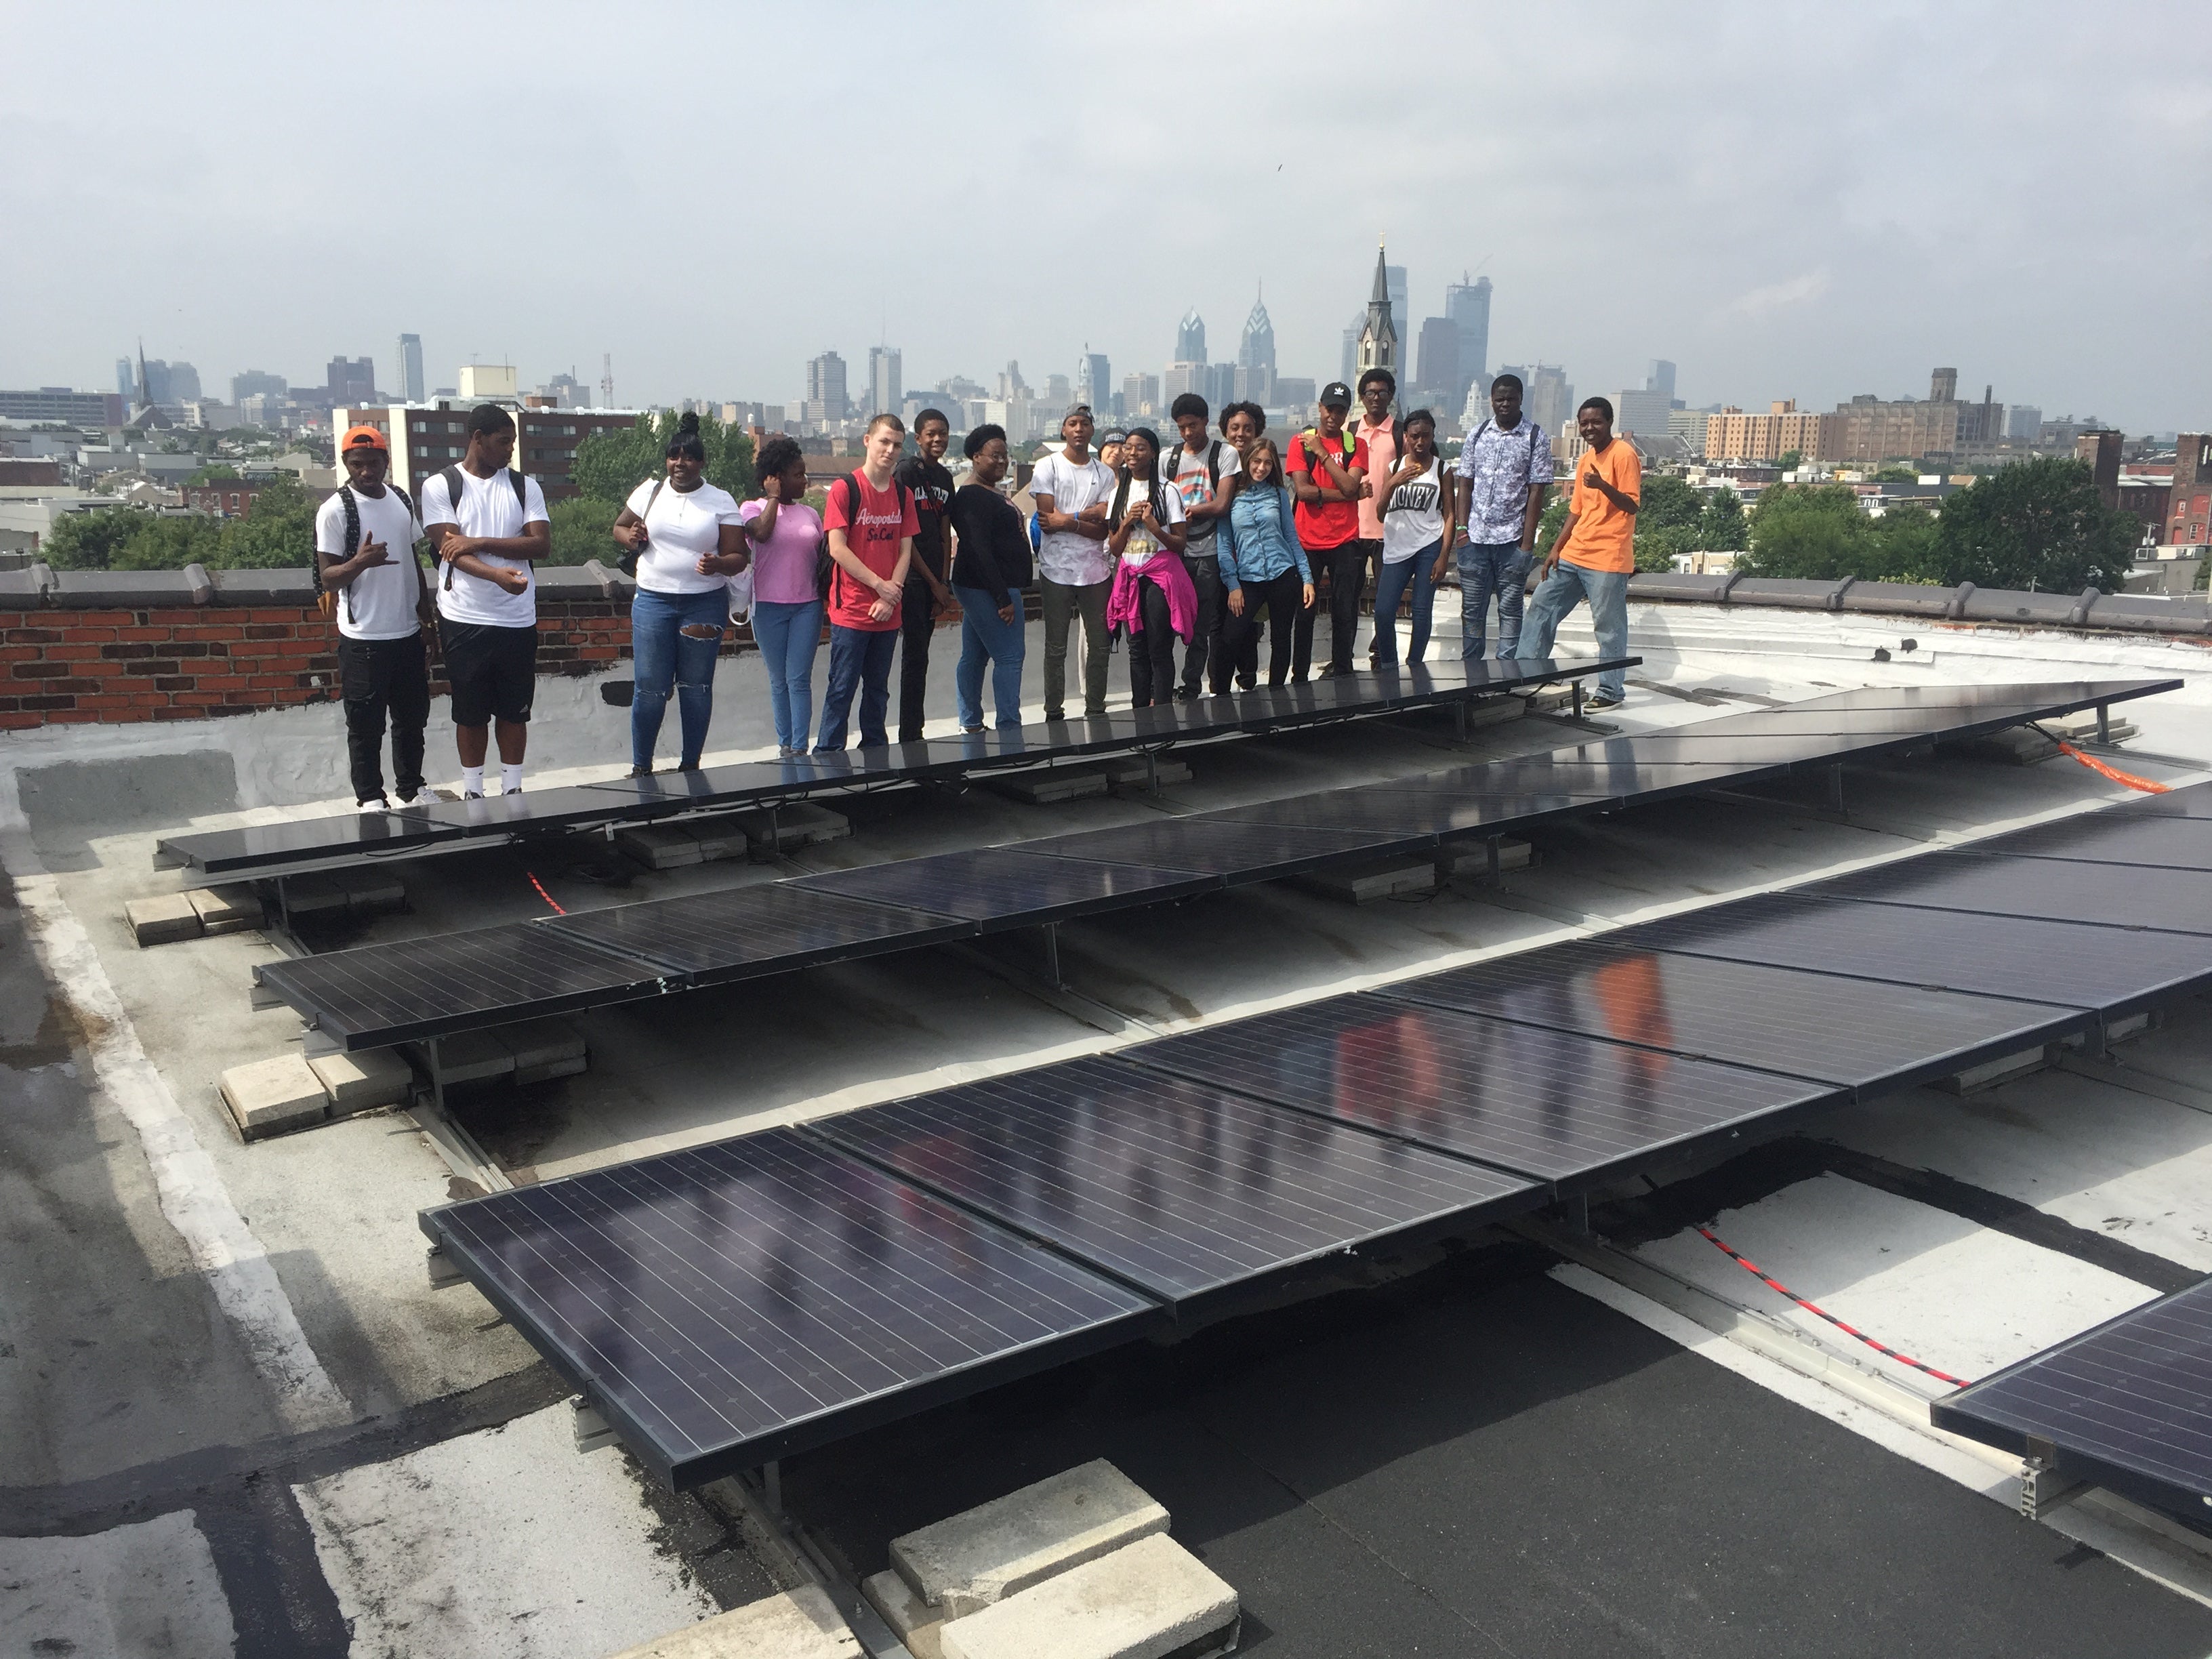 As part of the Solarize Philly program, the city is training Philadelphia public school students for future jobs in the solar industry. 